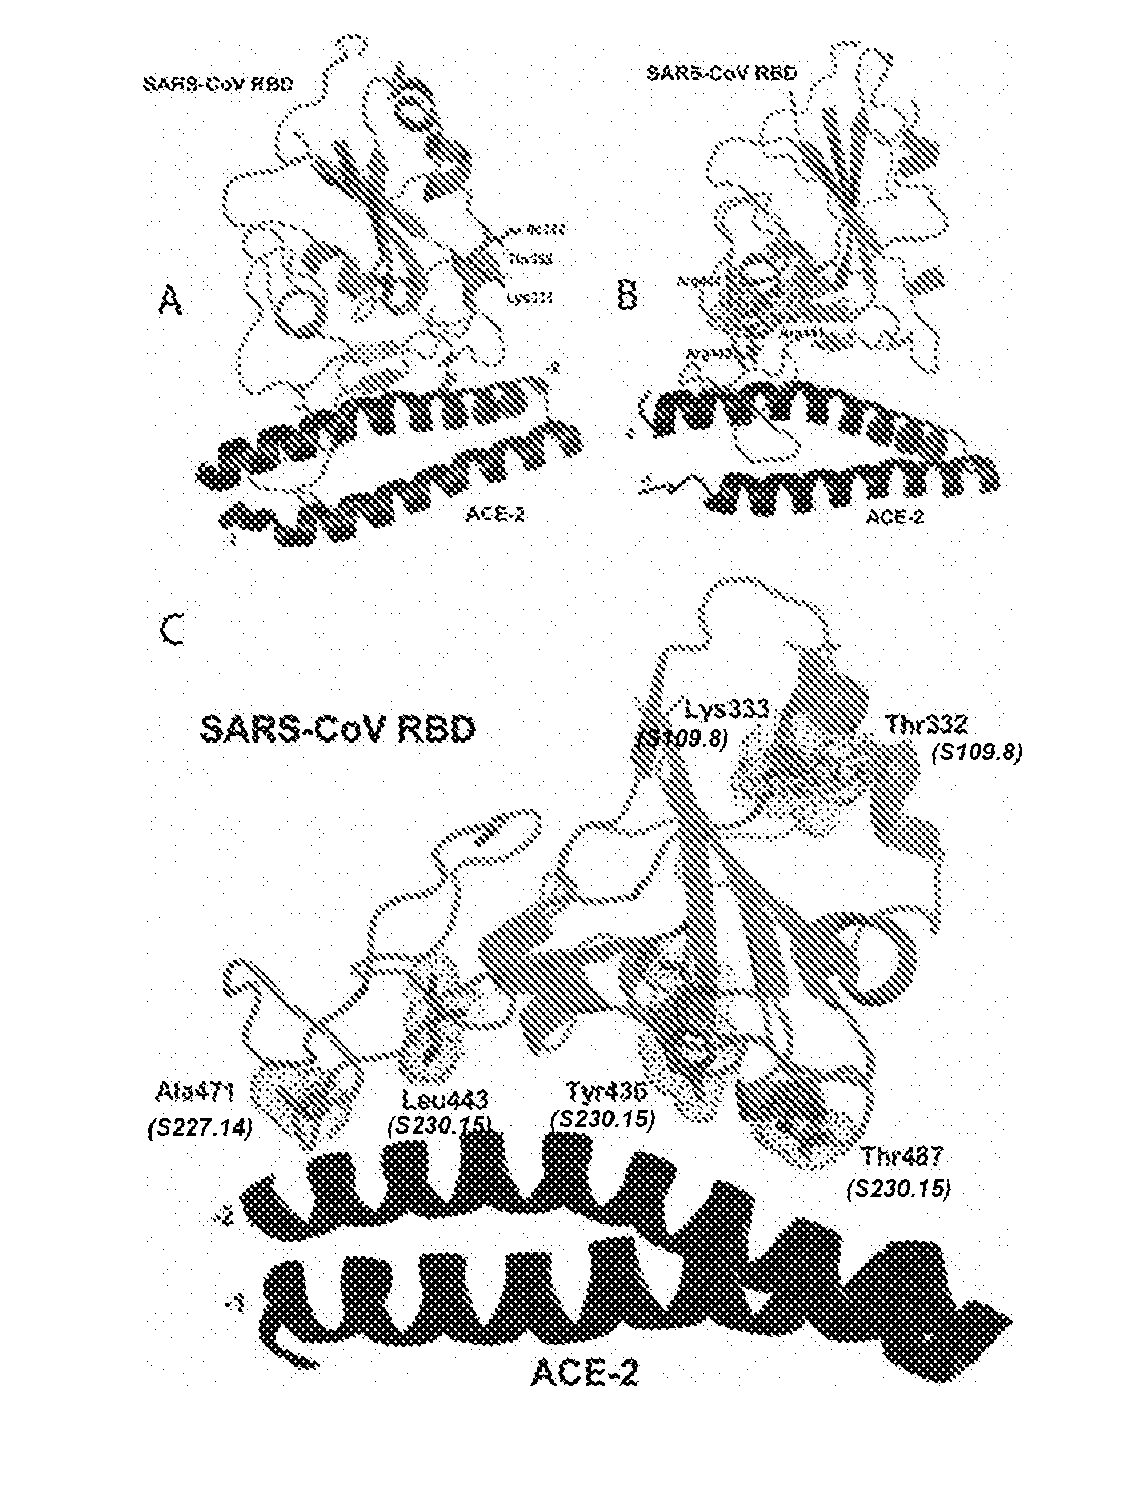 CROSS-NEUTRALIZING HUMAN MONOCLONAL ANTIBODIES TO SARS-CoV AND METHODS OF USE THEREOF